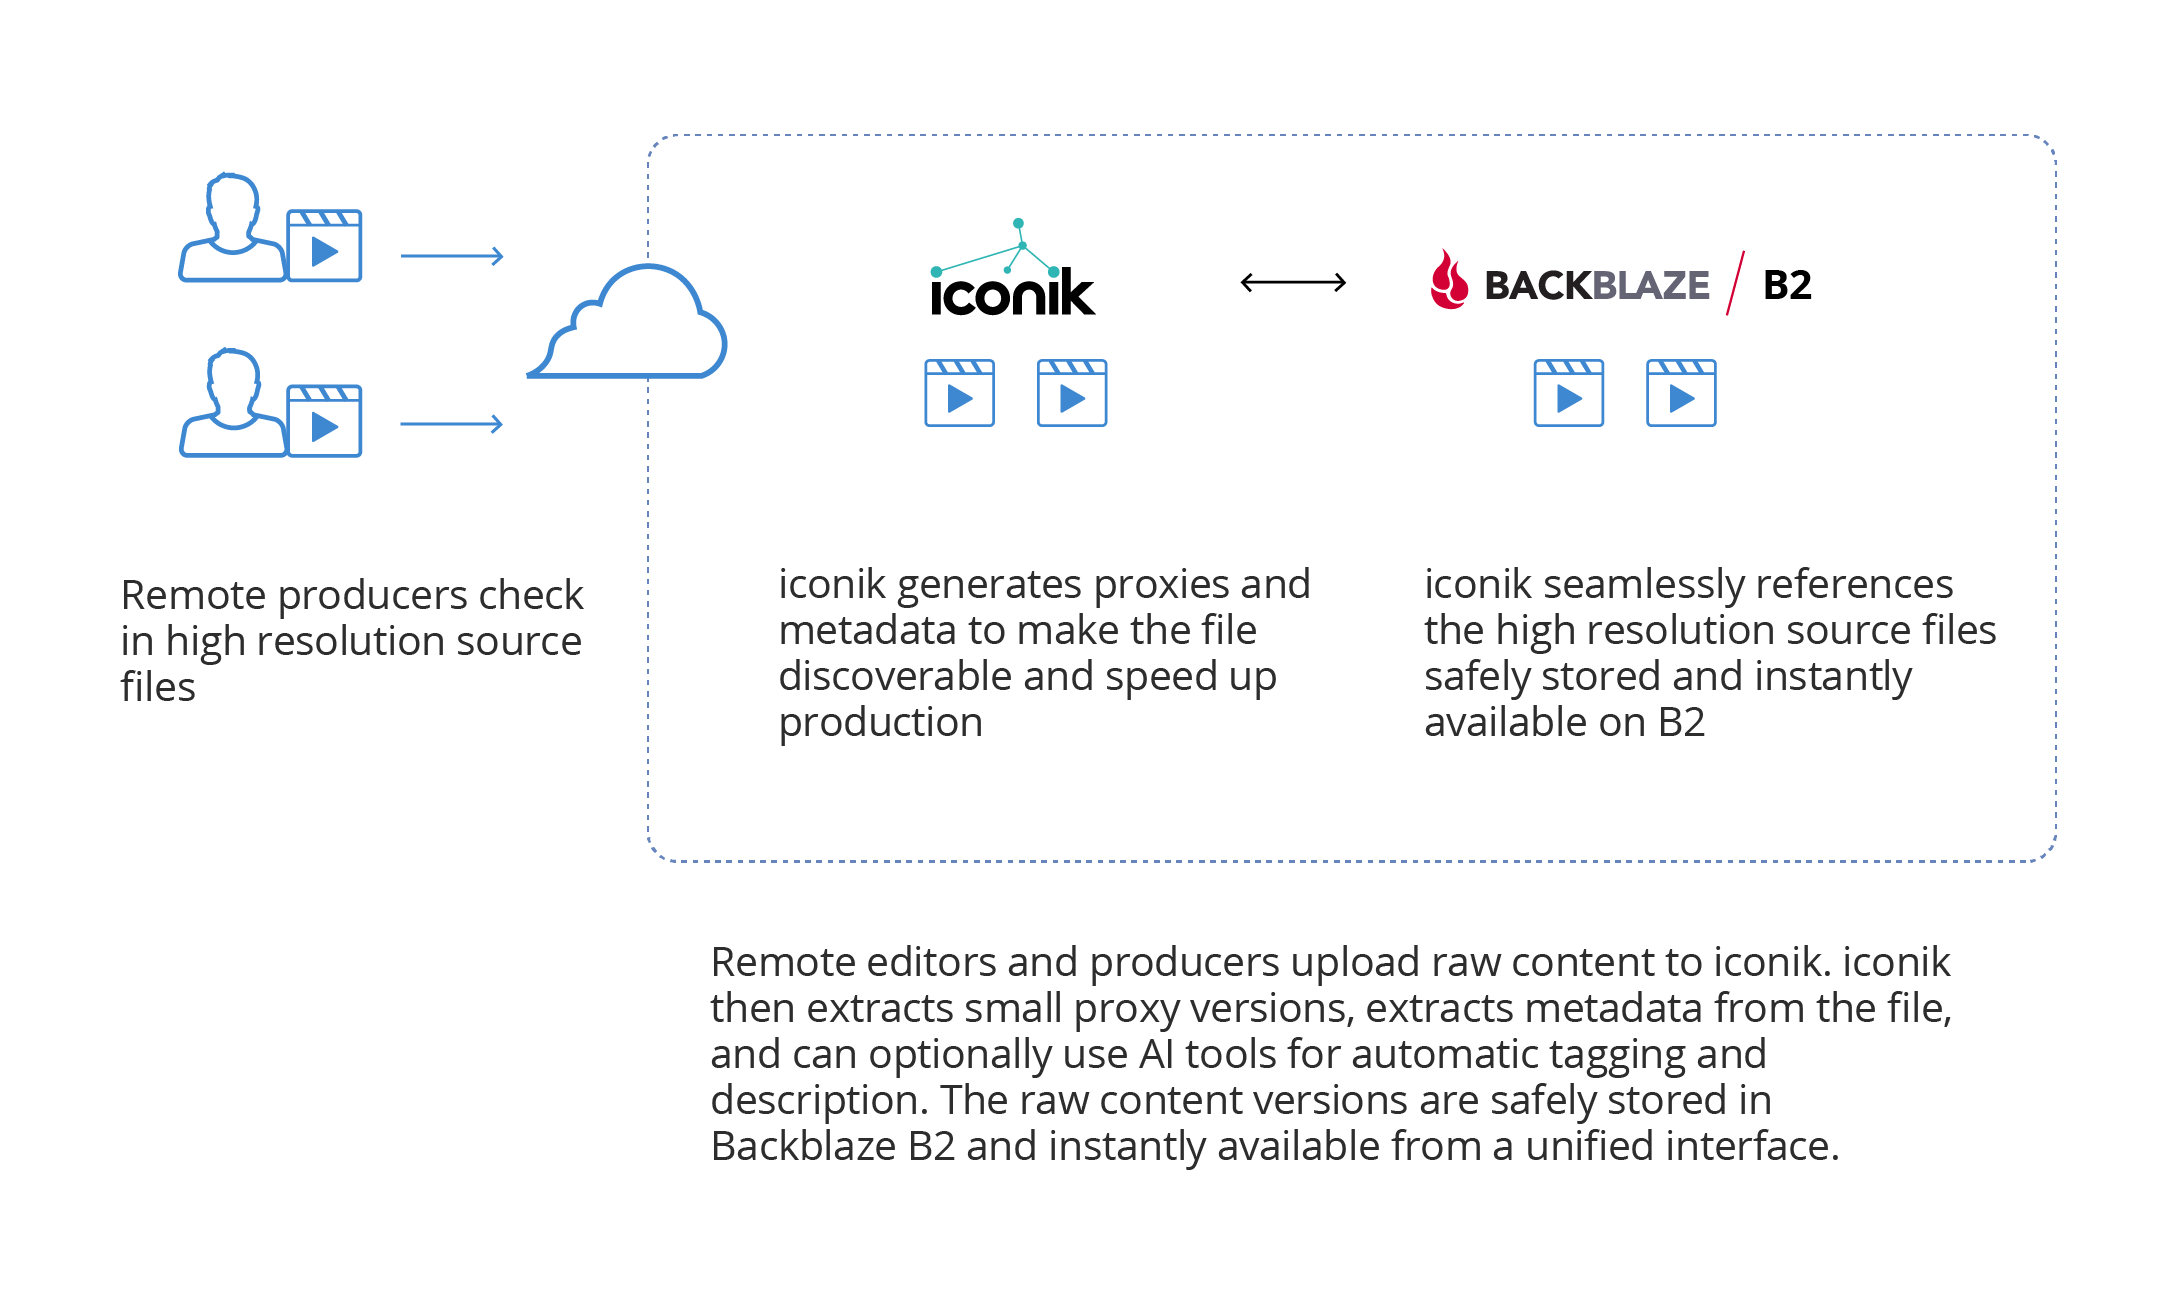 How Everwell uses iconik and Backblaze together